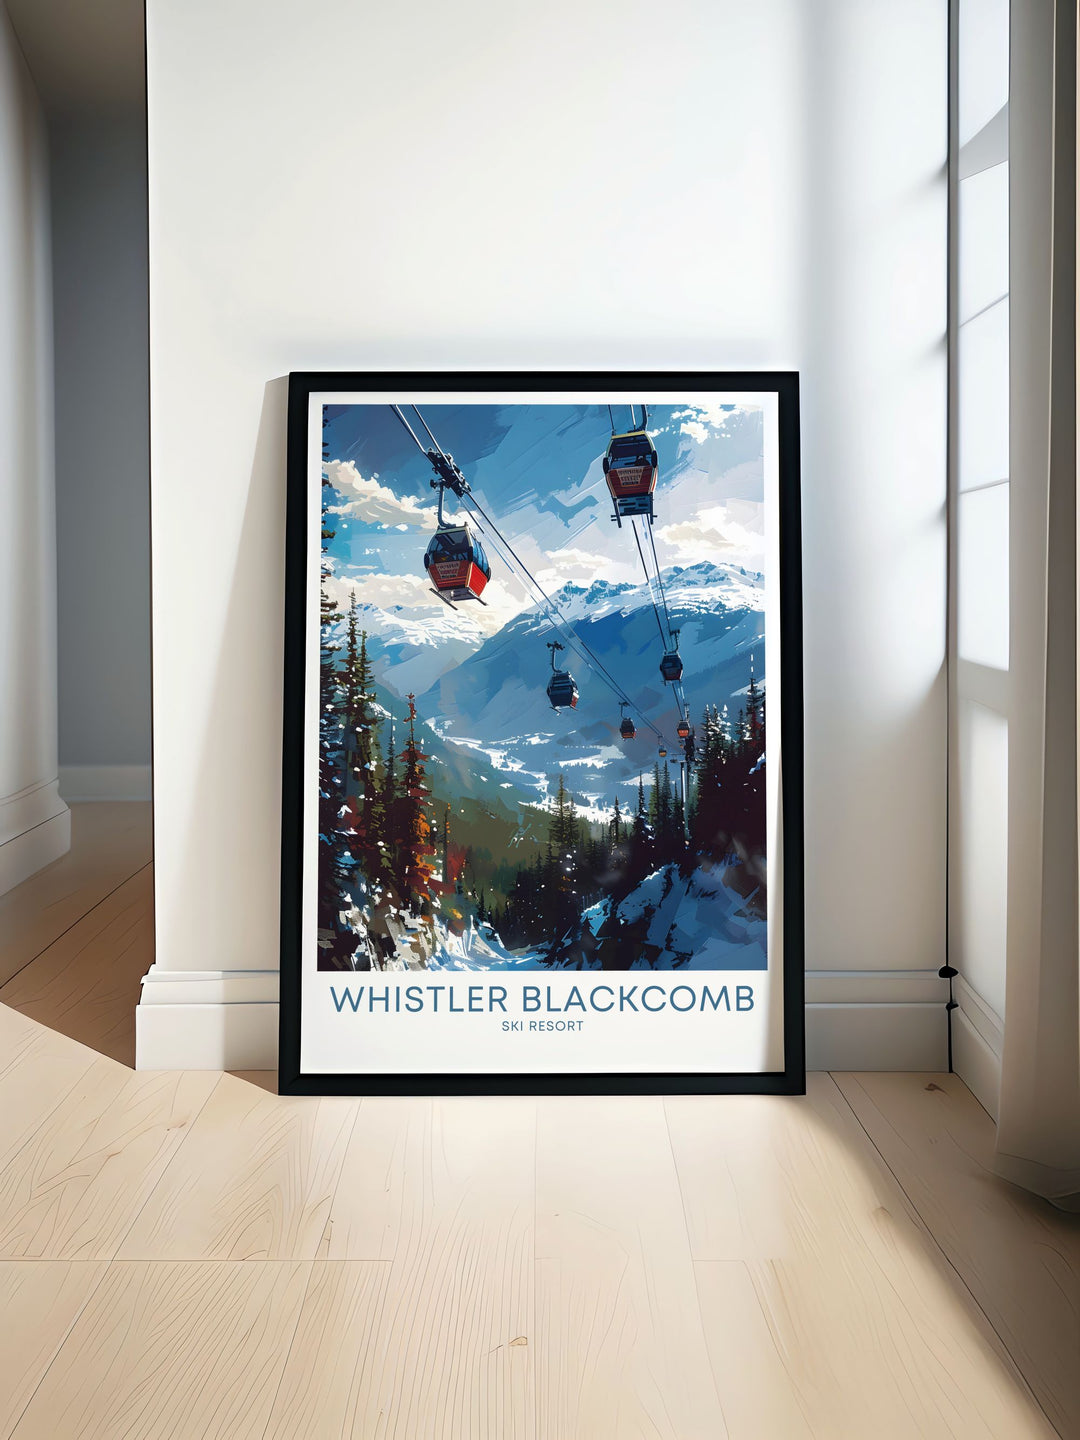 Whistler Blackcomb artwork featuring the Peak 2 Peak Gondola with breathtaking views of the Whistler Ski Resort in British Columbia BC. Perfect for winter sports enthusiasts and home decor lovers looking for stunning skiing and snowboarding wall art.